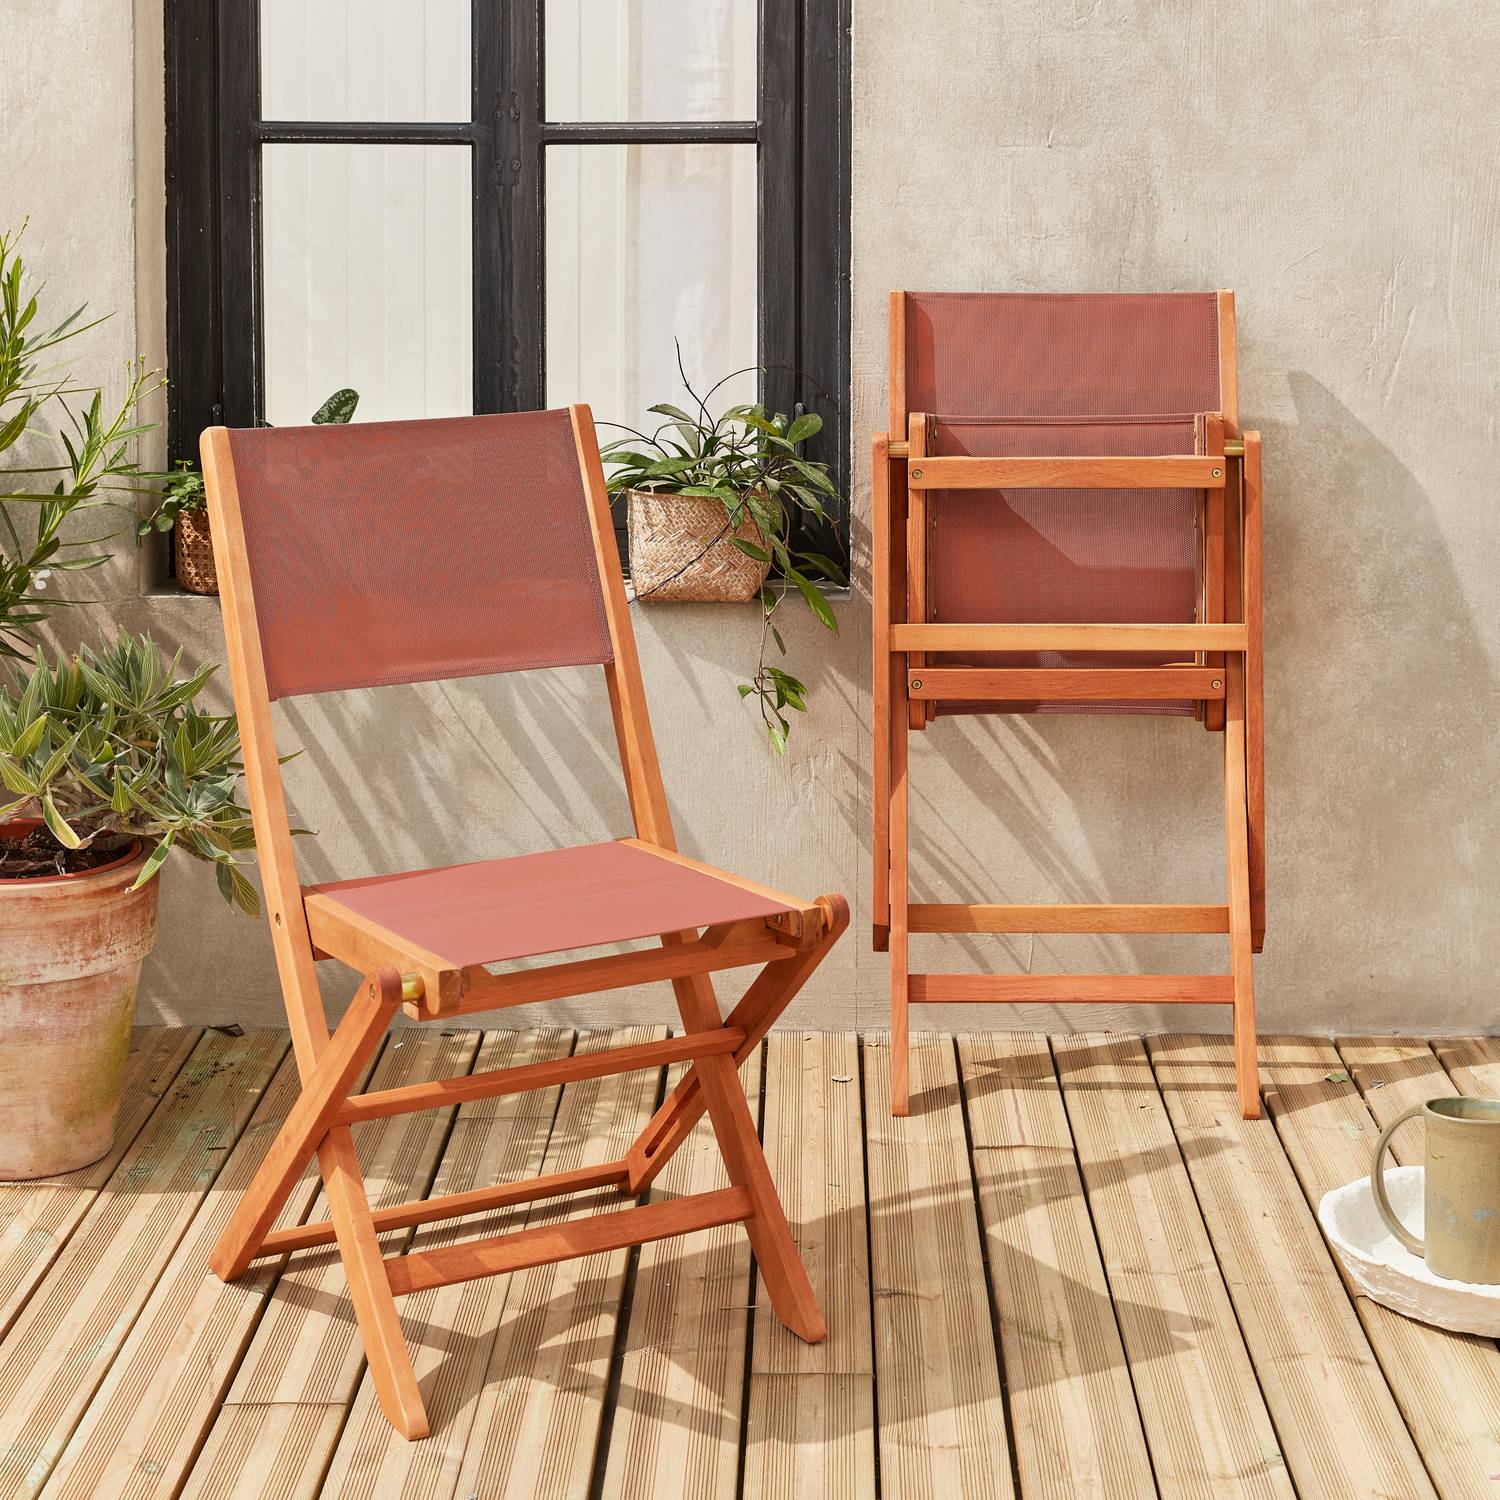 Set of 2 garden chairs in wood,  oiled FSC eucalyptus and textilene folding chairs - Almeria -  Terracotta Photo2